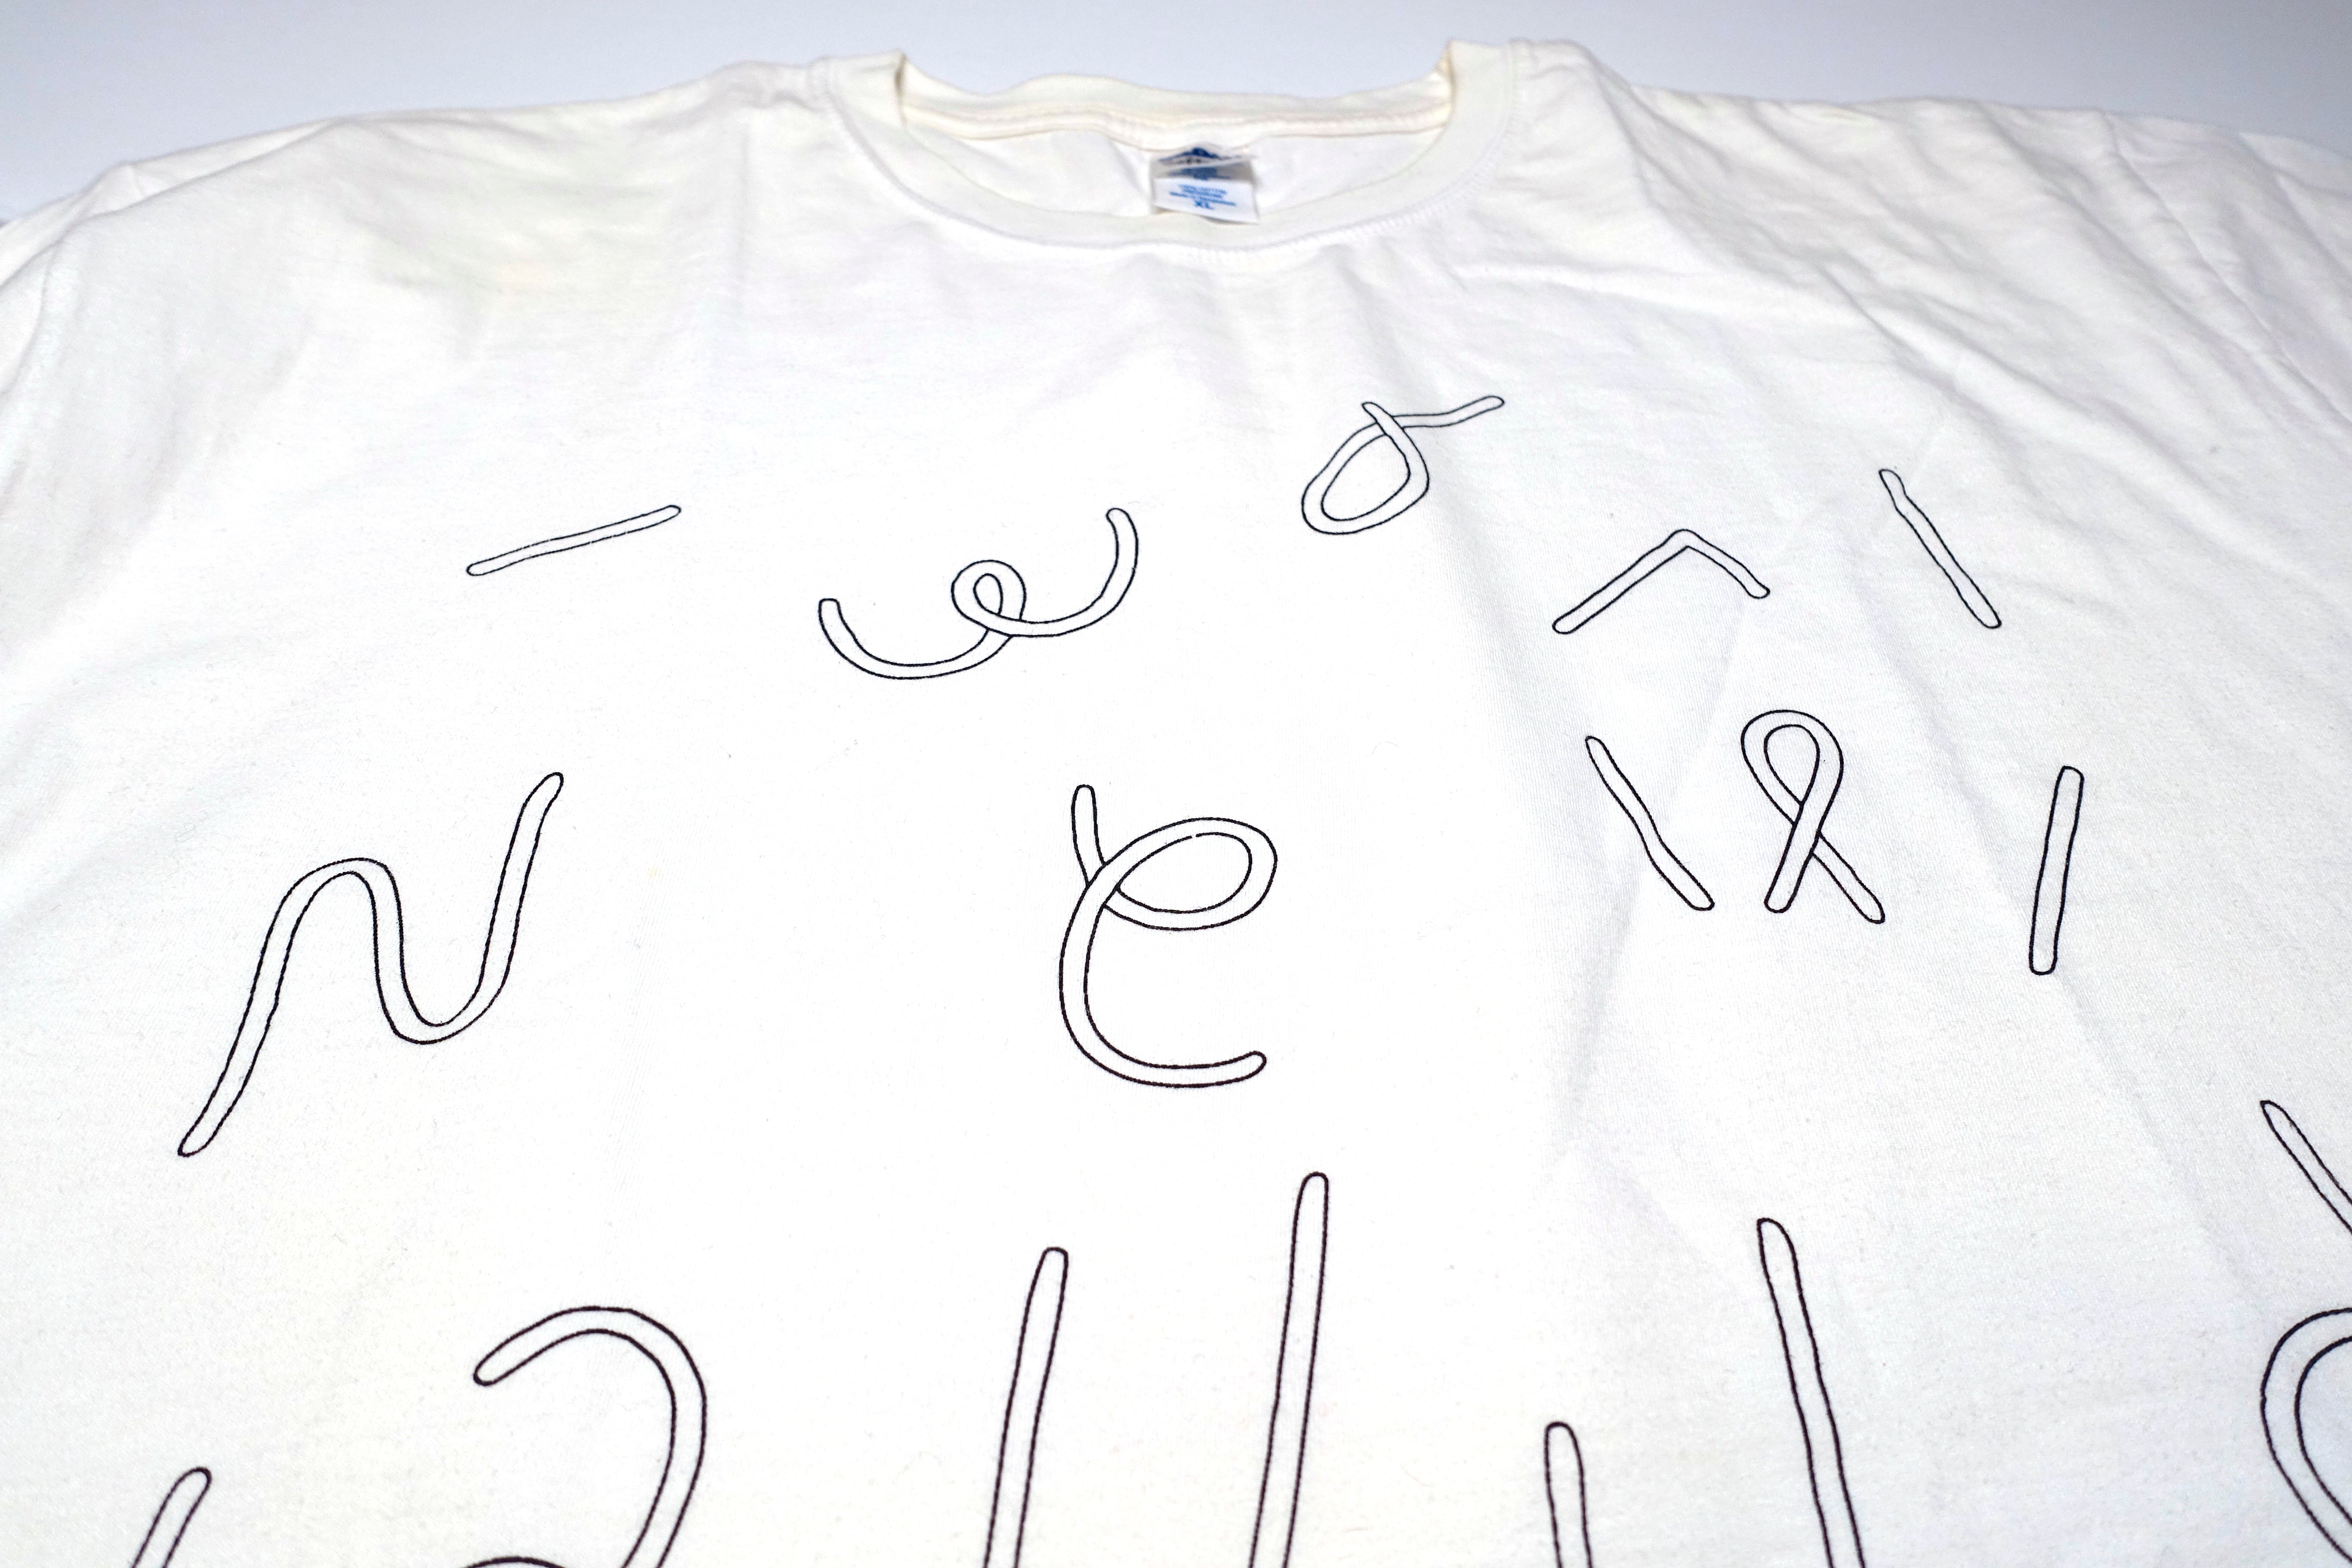 New Build - Squiggly Lines Logo 2012 Tour Shirt Size Large